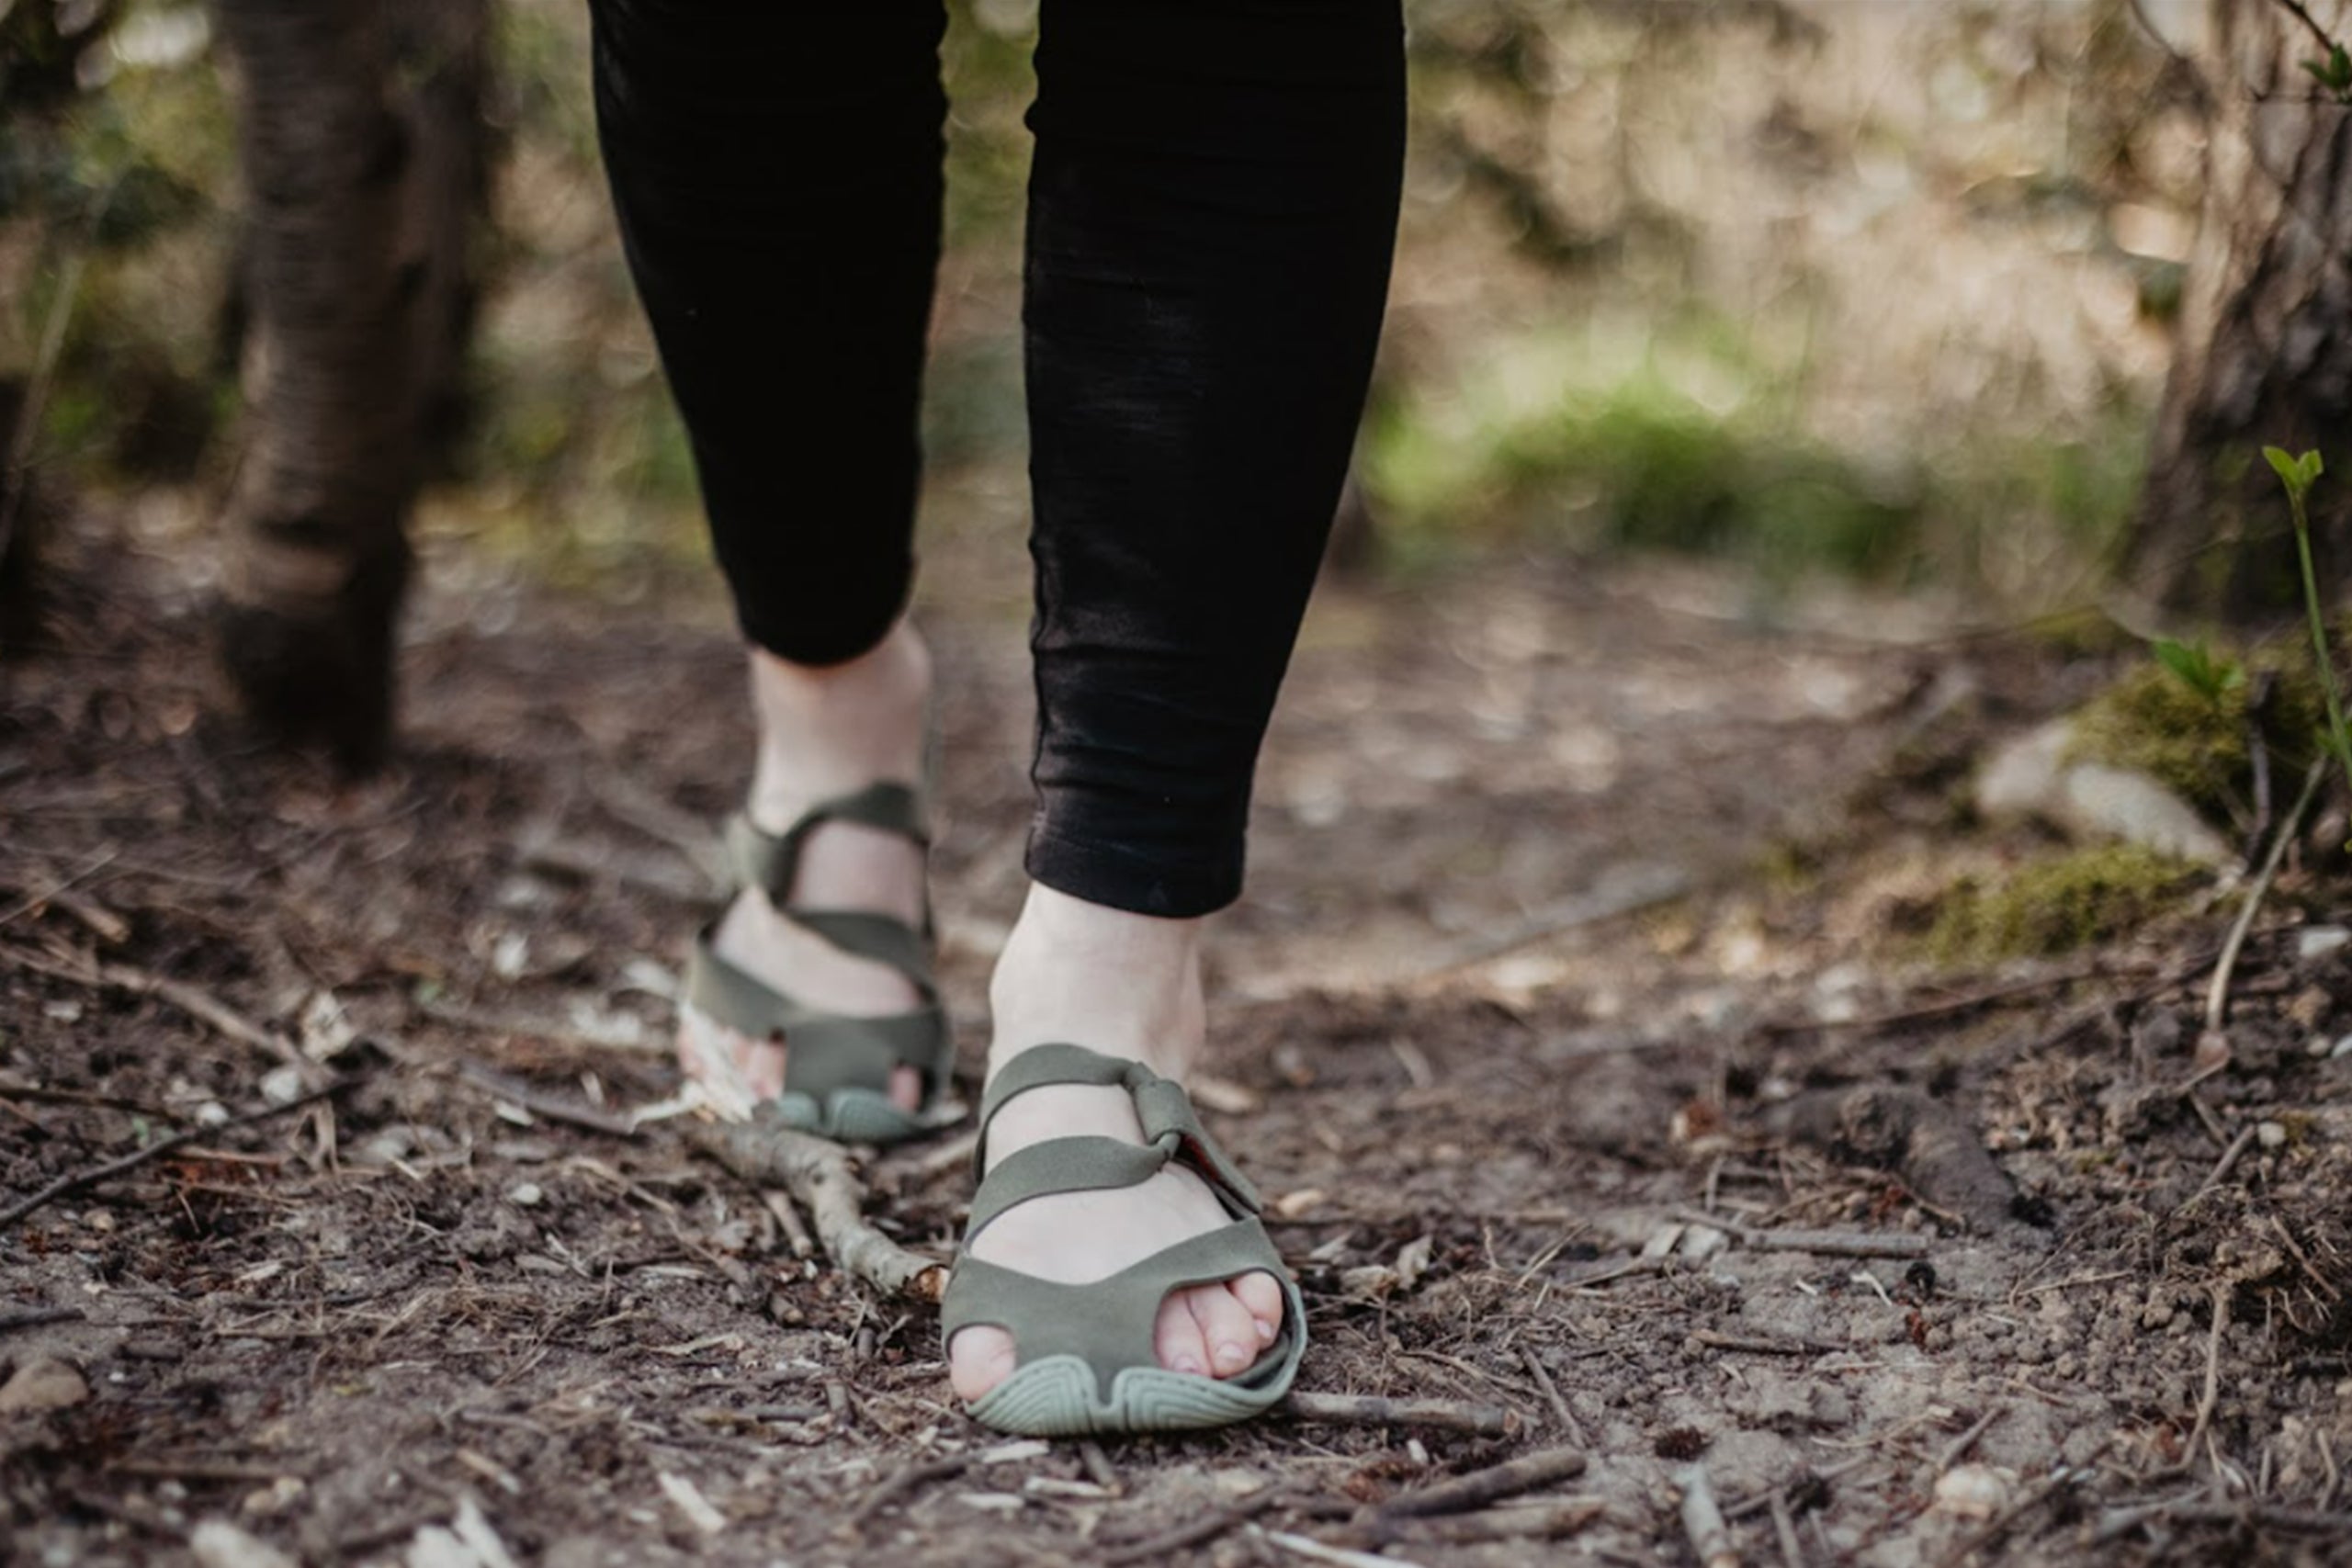 Two feet, about up to the calves in the picture, on a forest path. Wildling sandals on the feet.